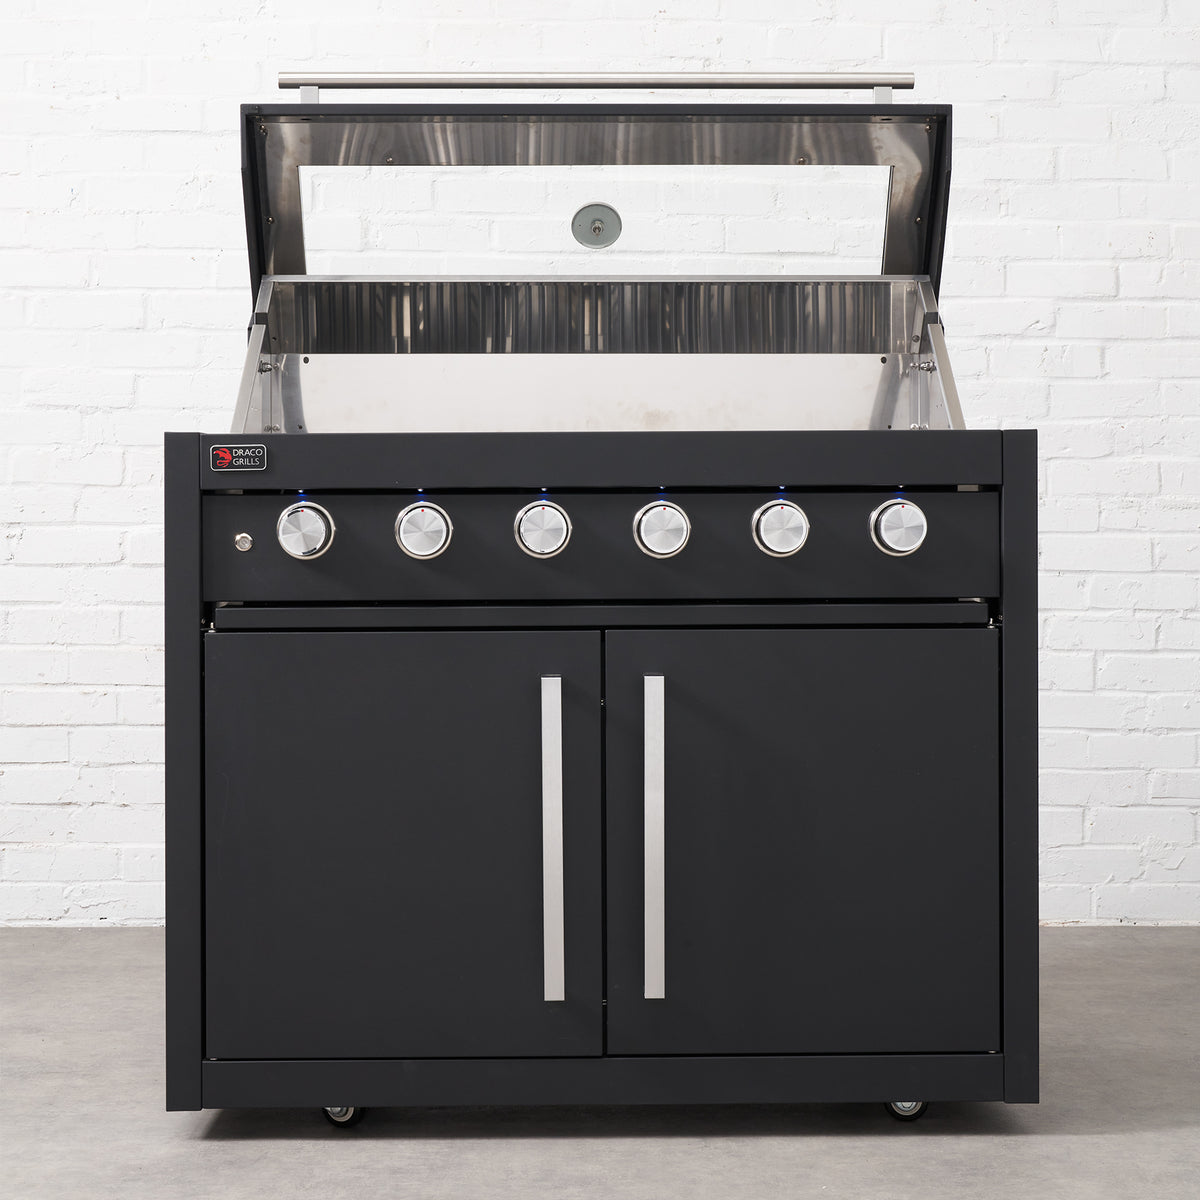 Draco Grills Fusion Black 6 Burner Gas Barbecue with Cabinet